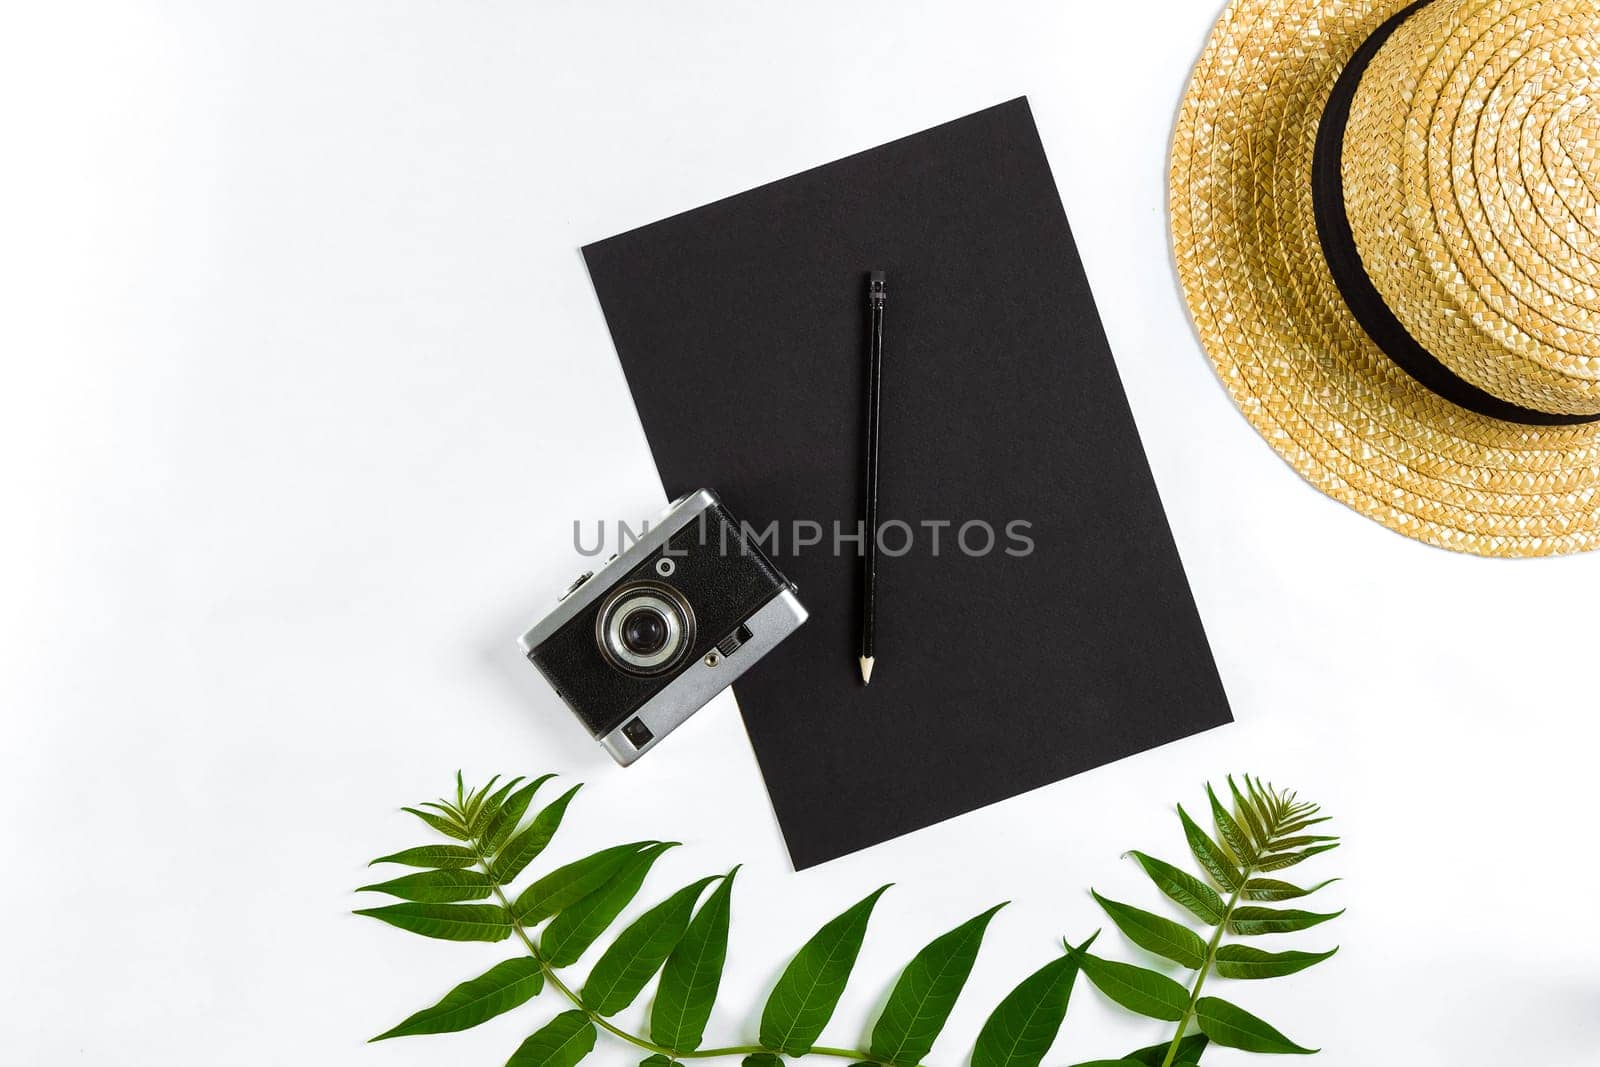 Straw hat with green leaves and old camera on white background, Summer background. Top view. Copy space. Still life. Flat lay